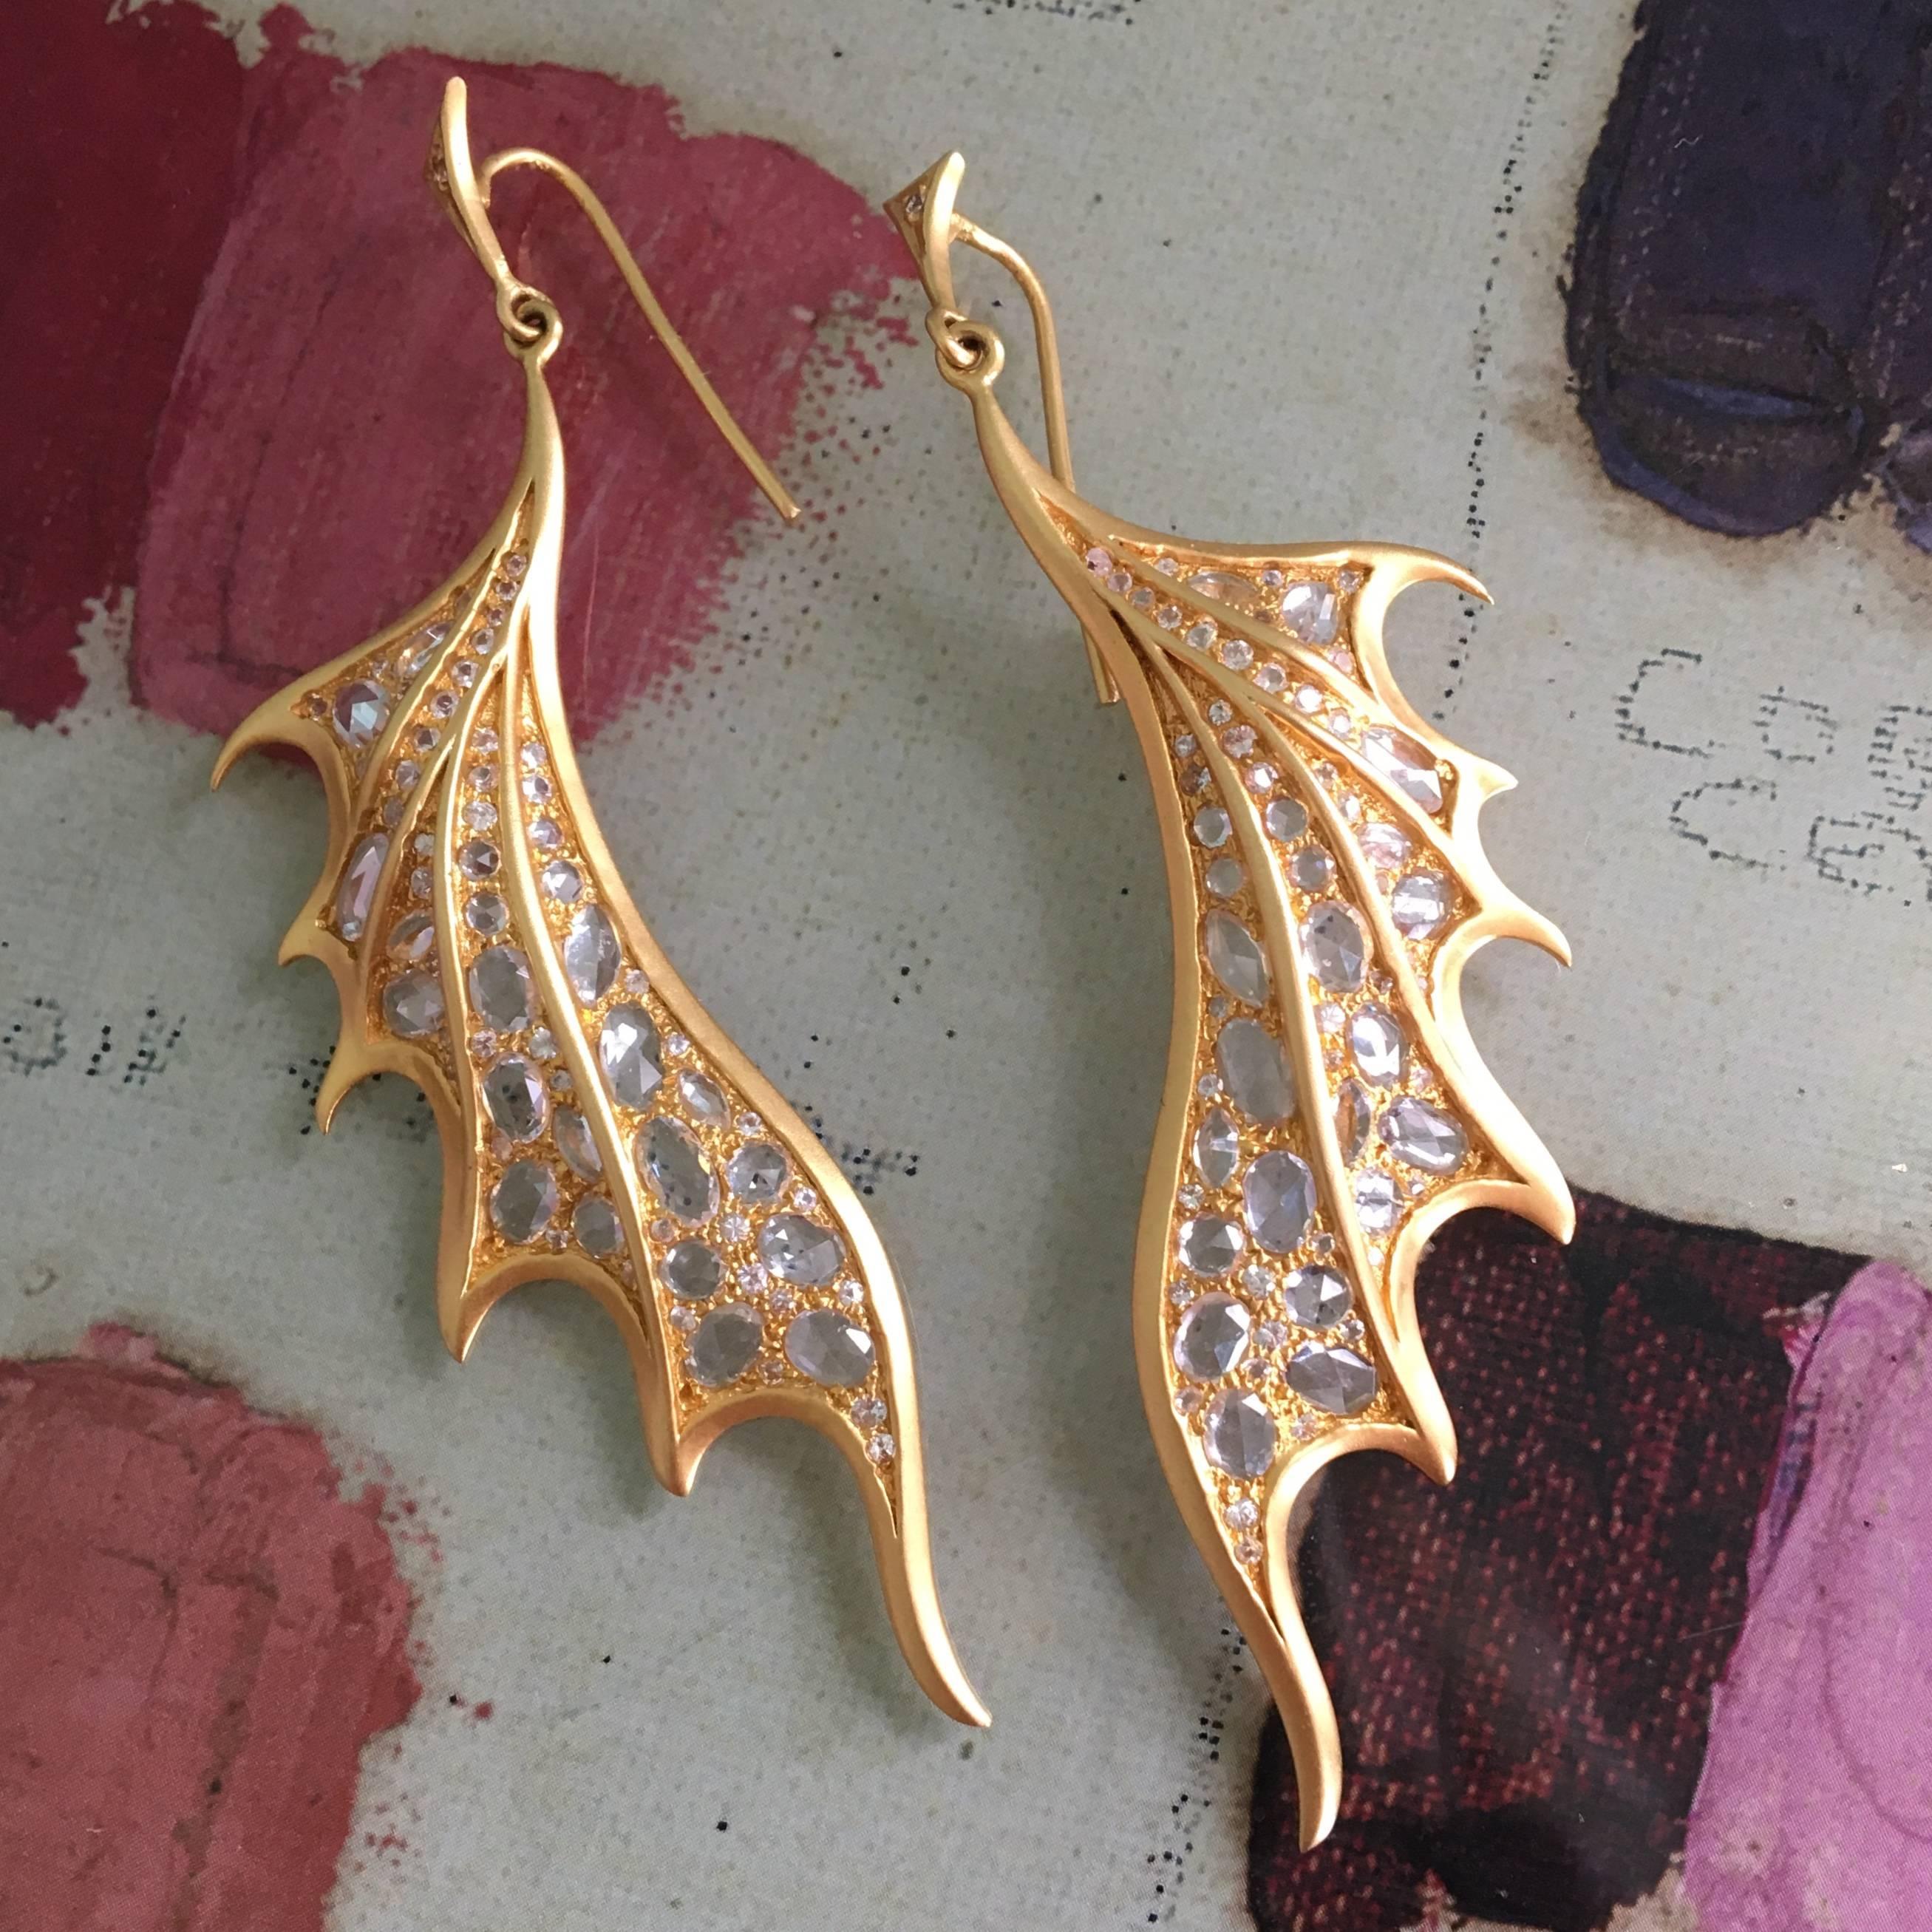 Truly a wow pair of earrings, these rose cut sapphires and 18kt yellow gold earrings make a spectacular  statement.  Designed to resemble dragon wings, these earrings curve gently towards the jawline, making them dramatic and flattering on the face.